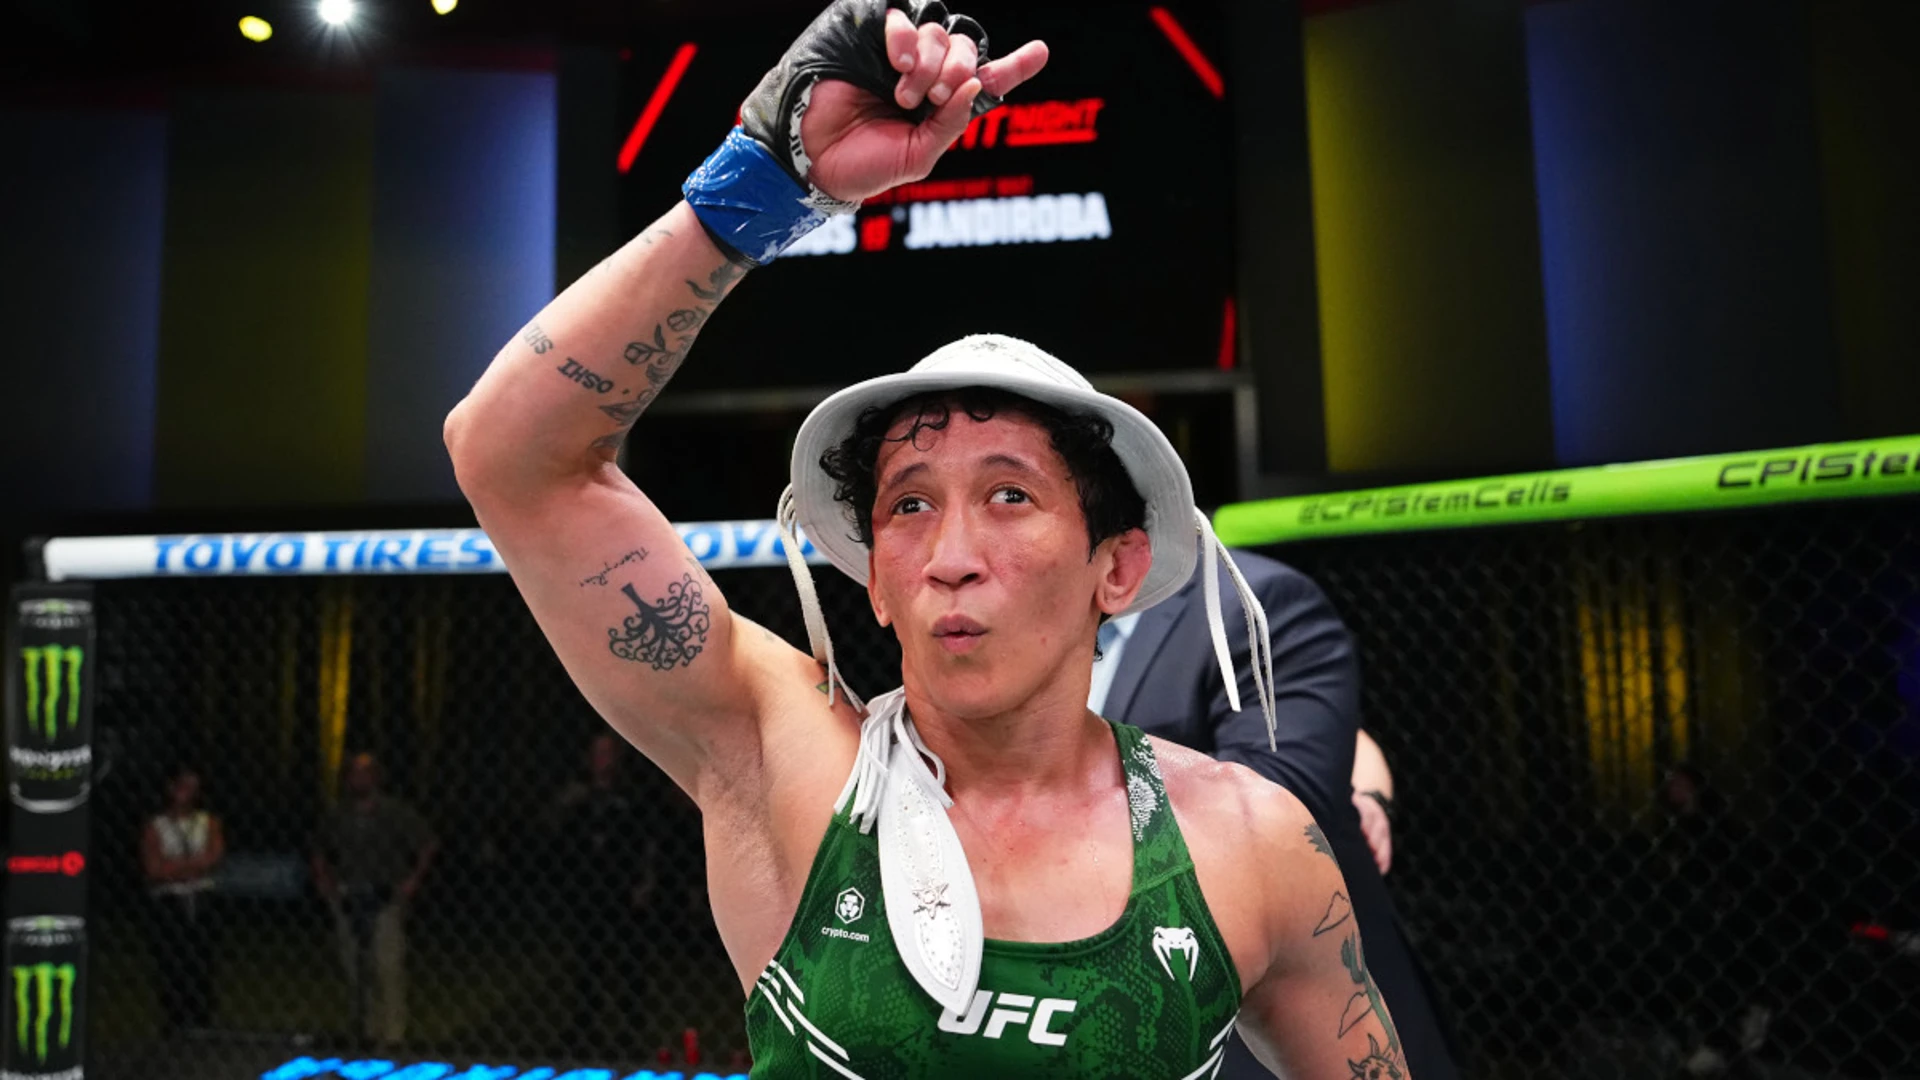 Jandiroba emerges as title contender after victory over Lemos